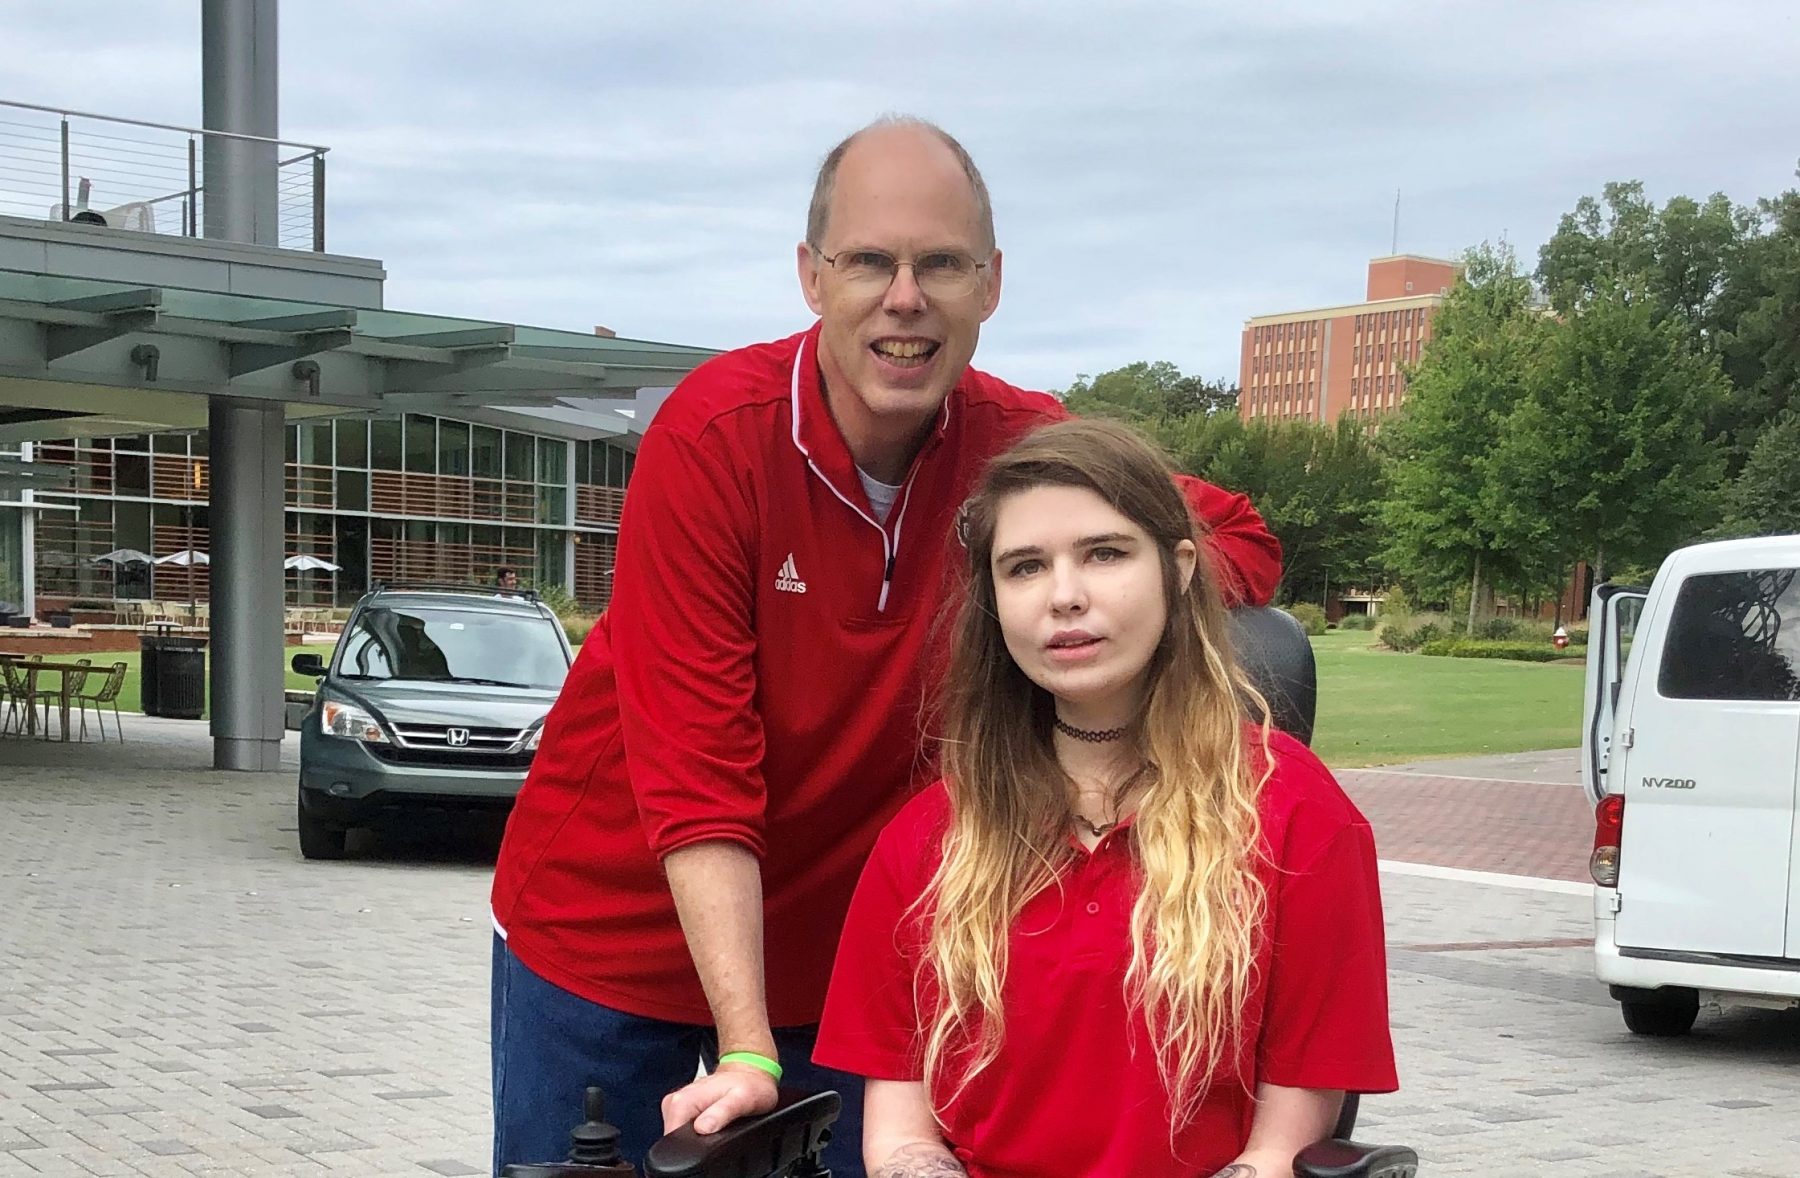 FSHD | Muscular Dystrophy News | rare diseases | image of Raymond and Meredith Huml